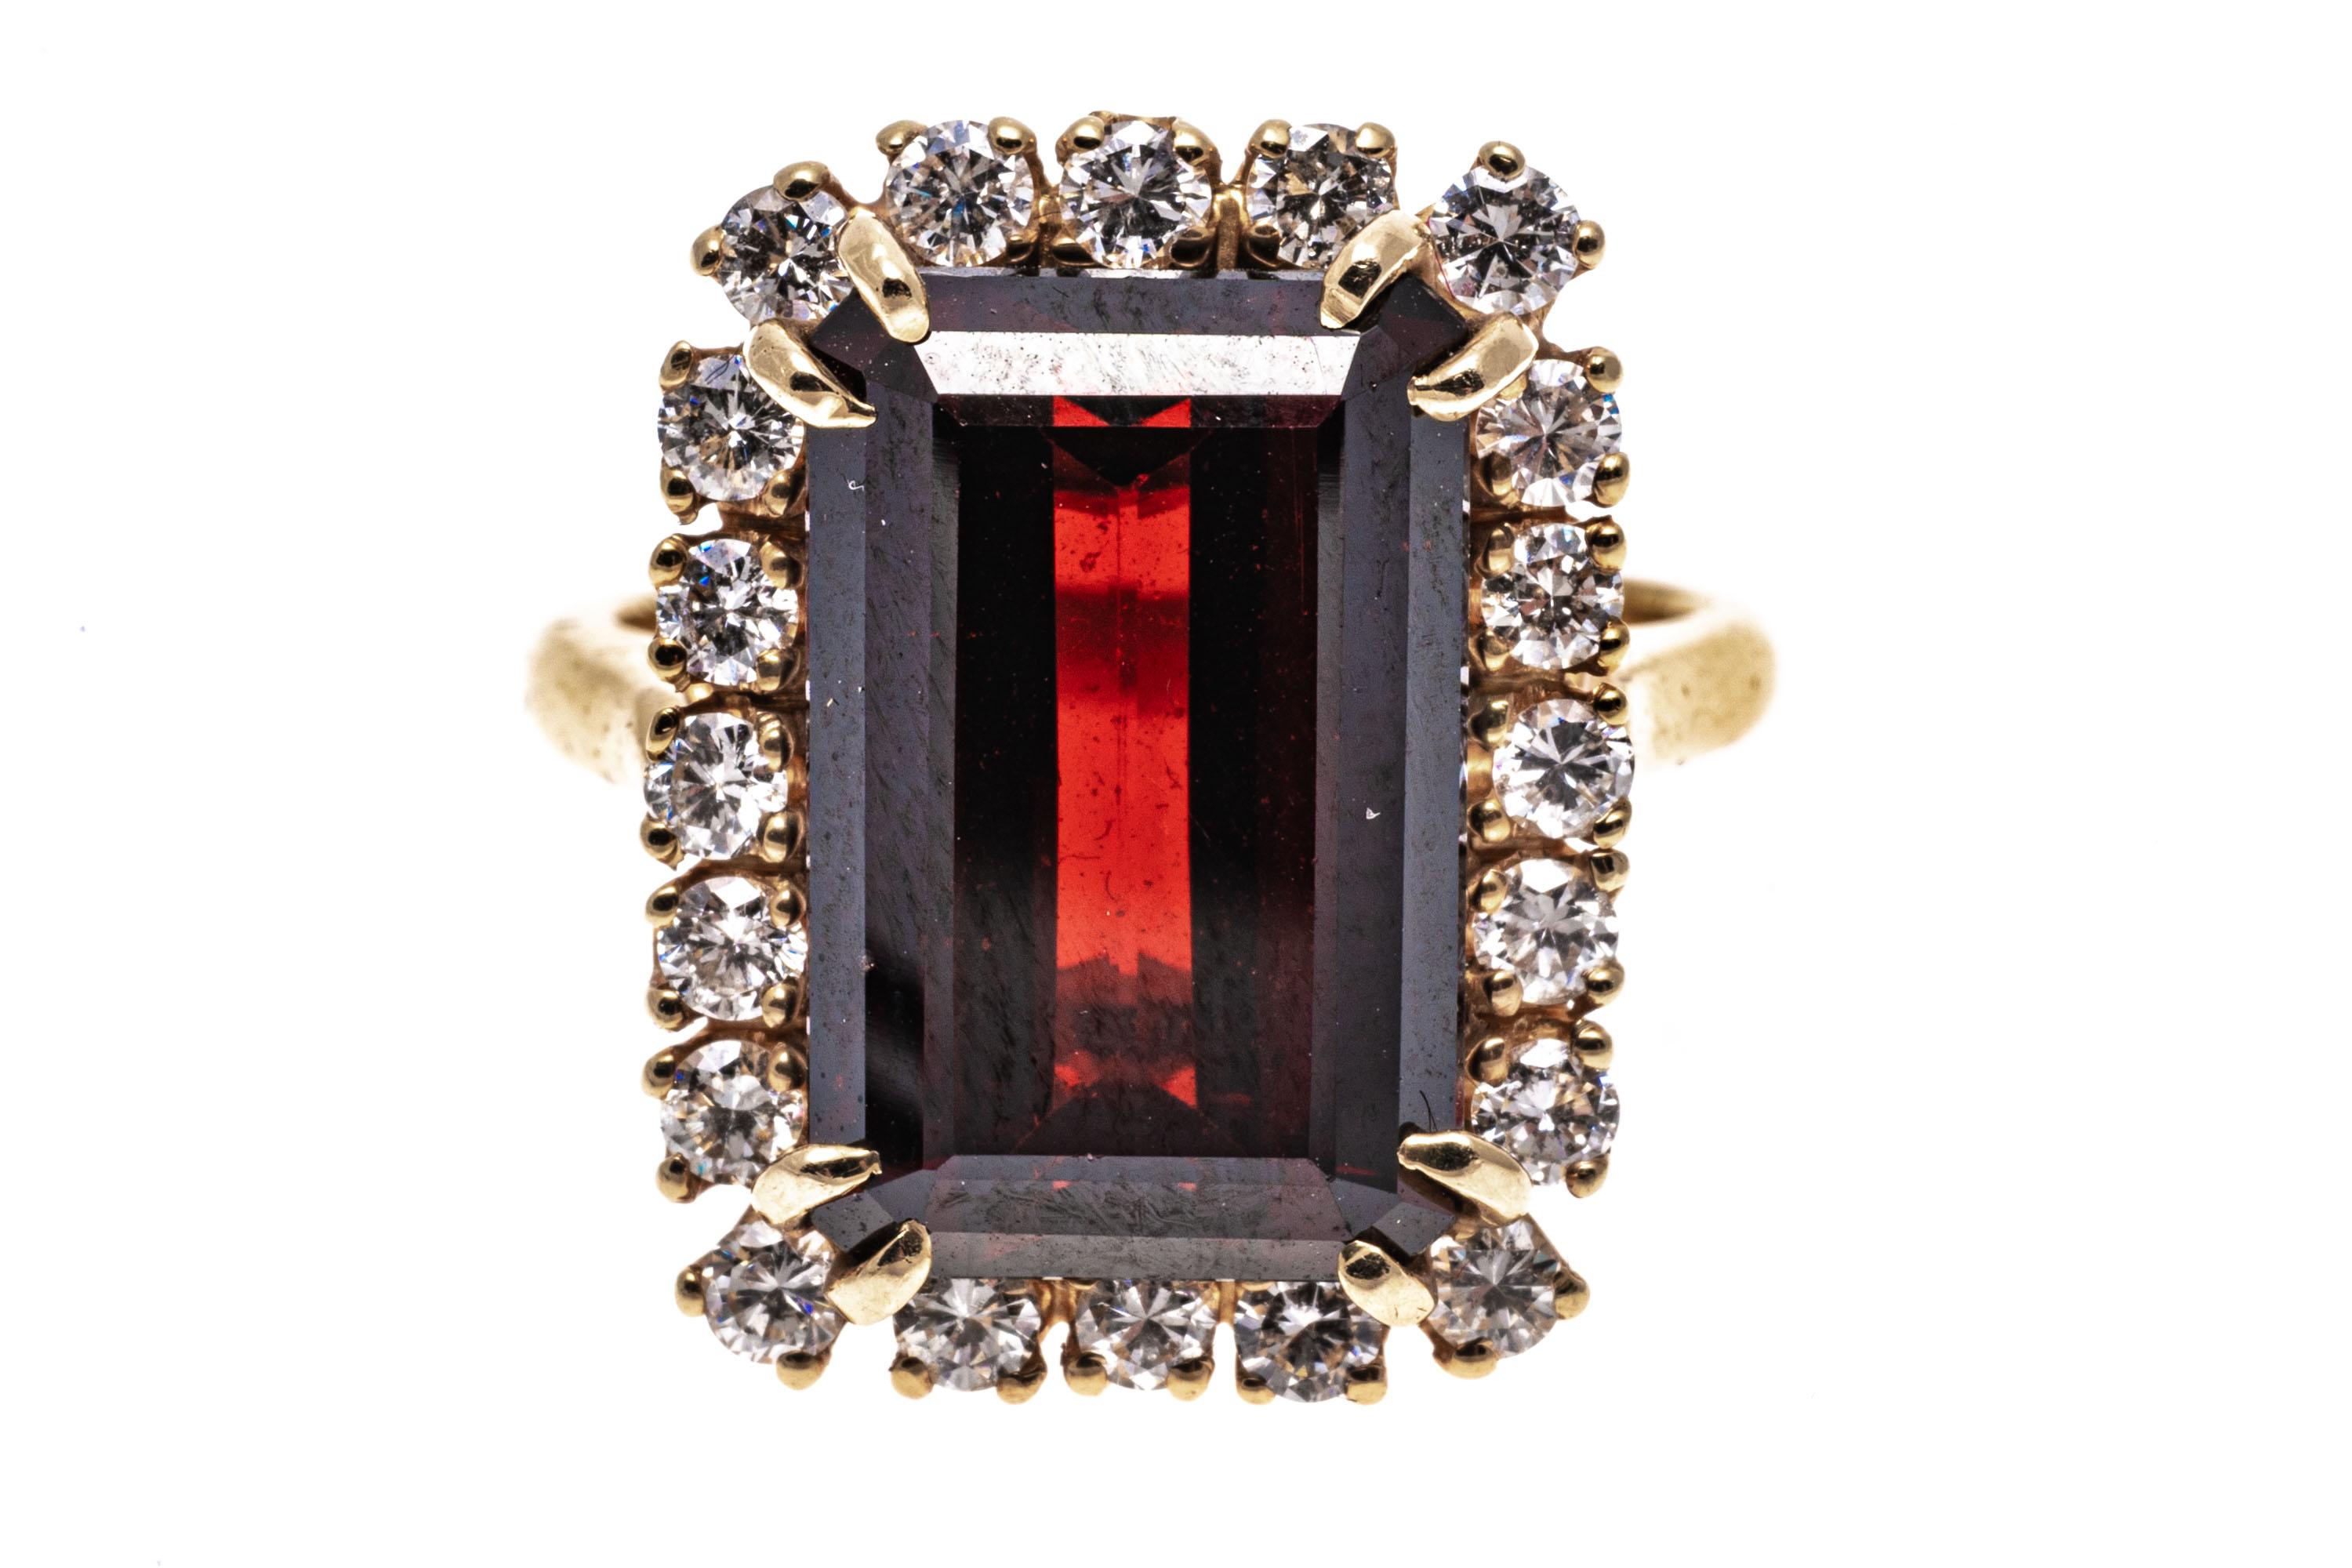 14k yellow gold ring. !4k yellow gold beautiful elongated, emerald cut faceted, medium to dark color burgundy garnet, approximately 7.43 CTS, set with split prongs and decorated with a halo of round faceted diamonds, approximately 0.60 TCW, prong